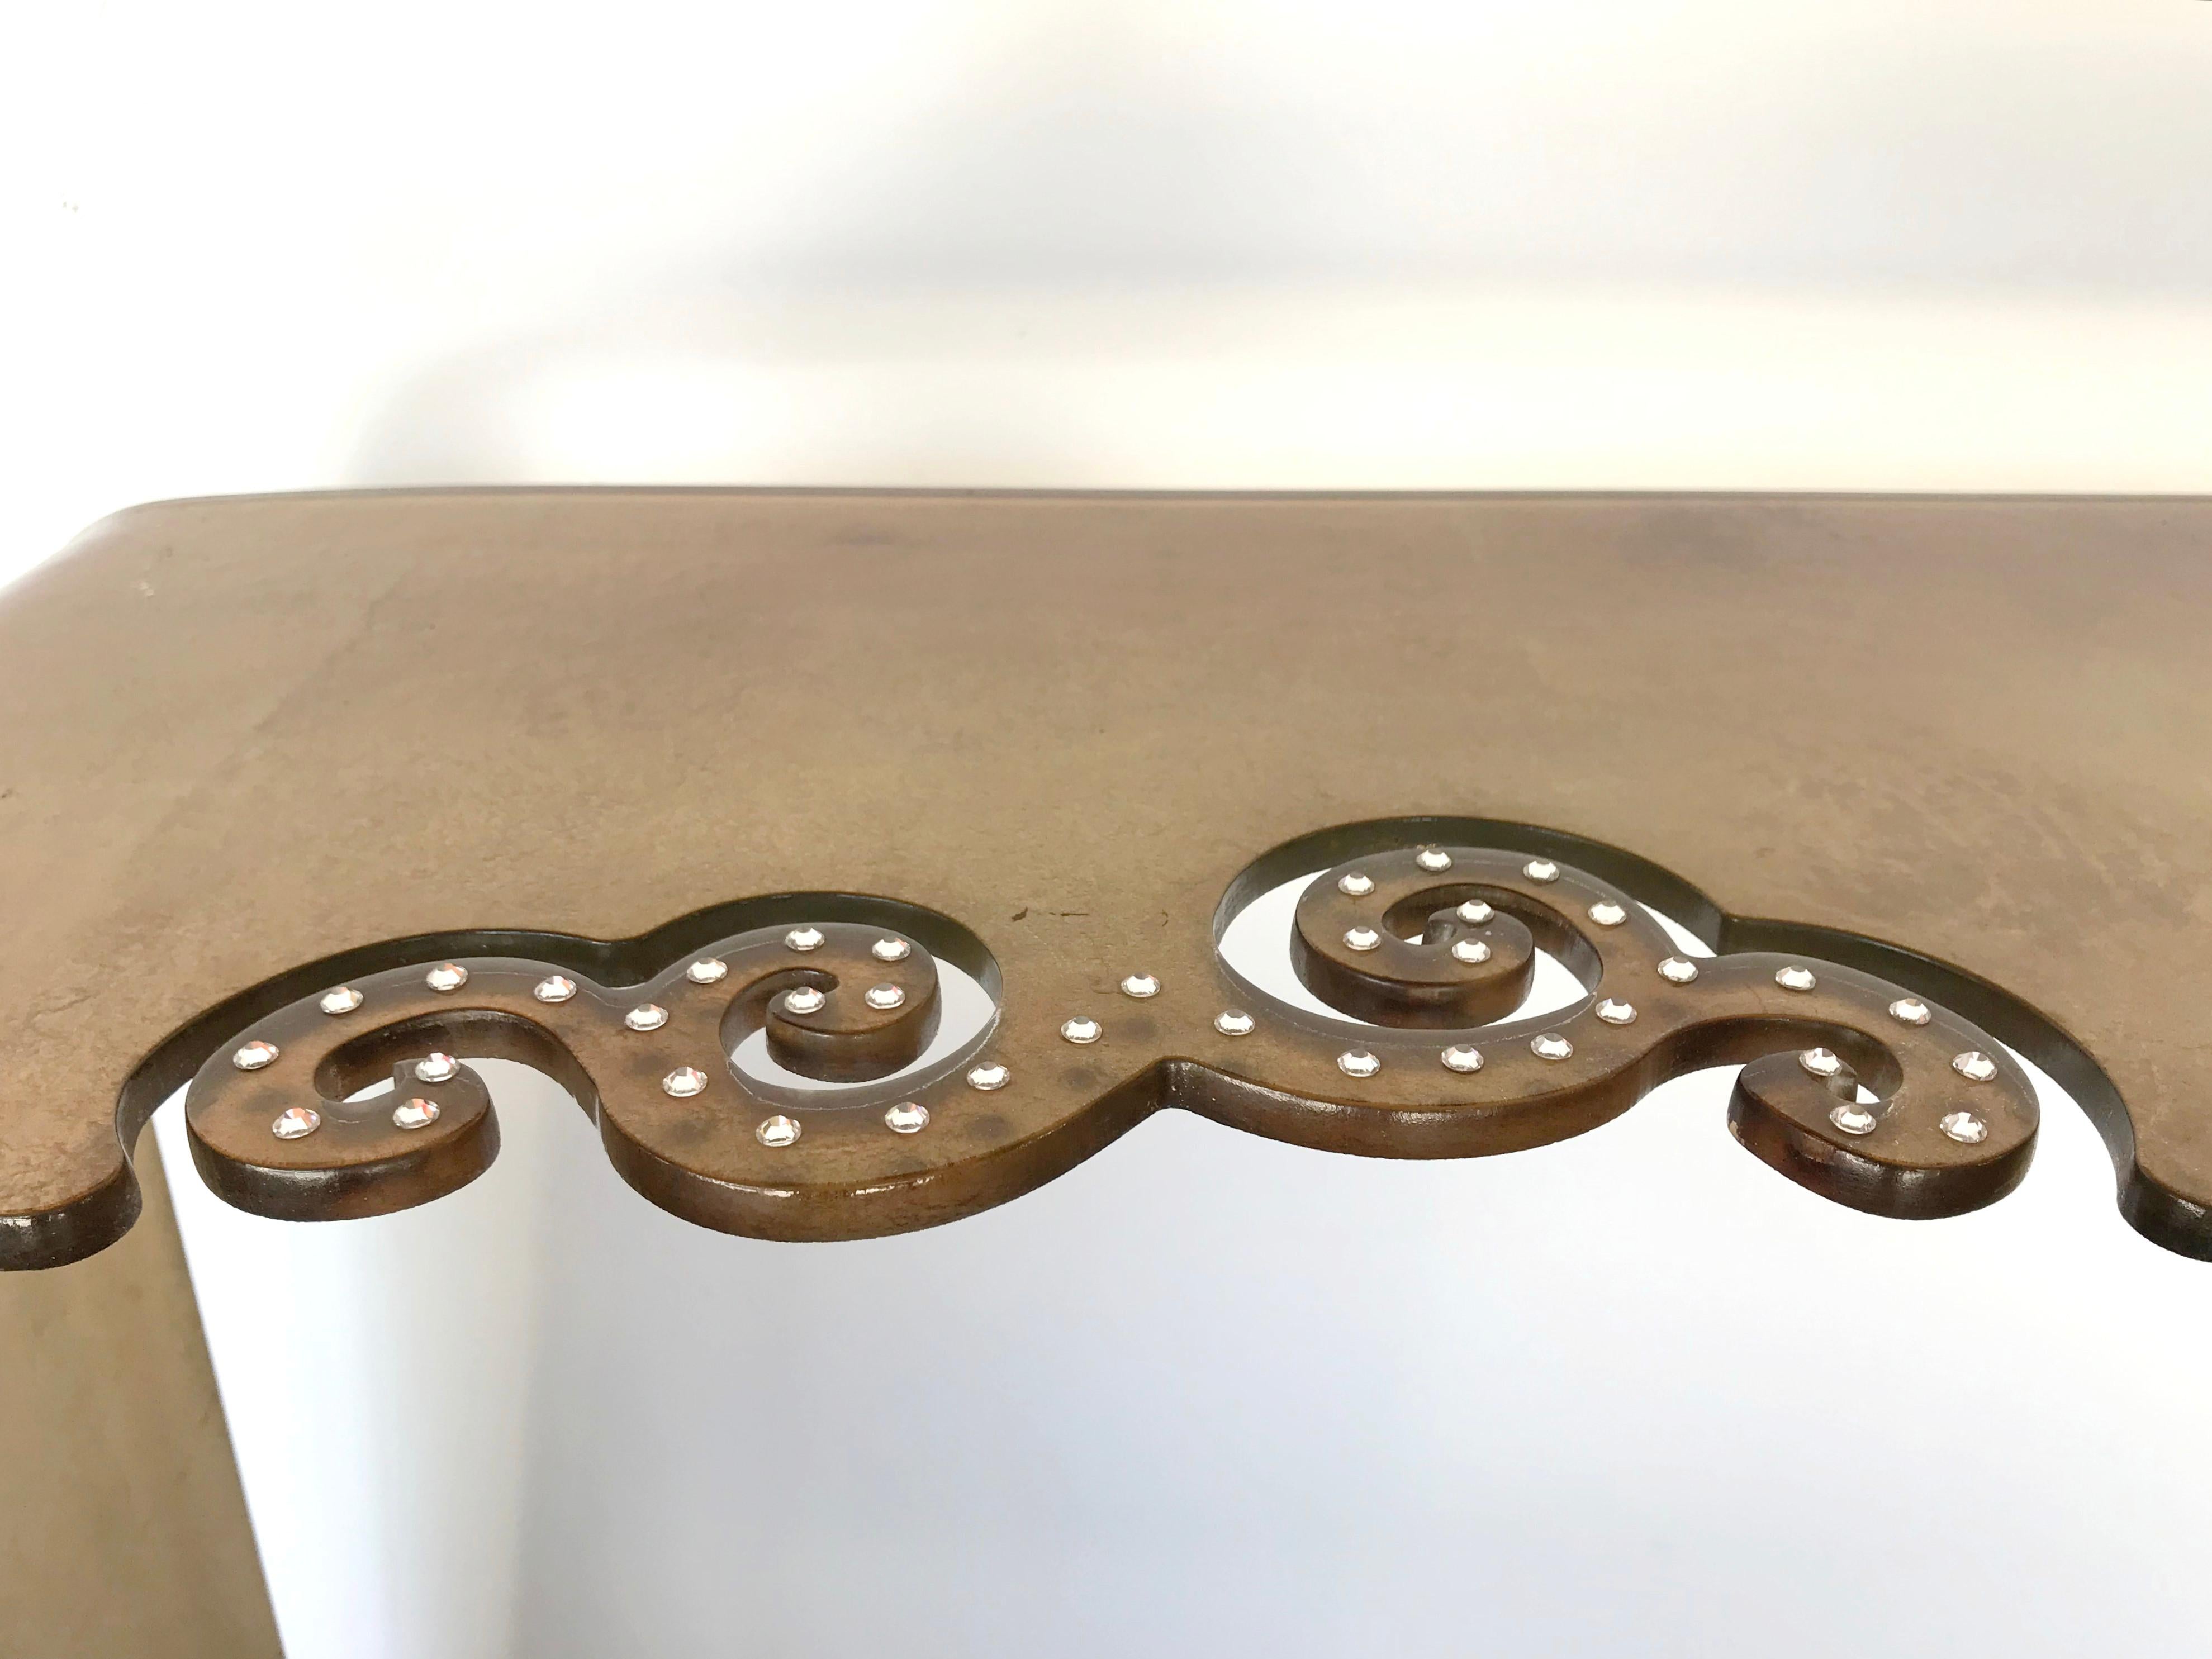 Modern Italian Gold Glass Console Table with Swarovski Crystals FINAL CLEARANCE SALE